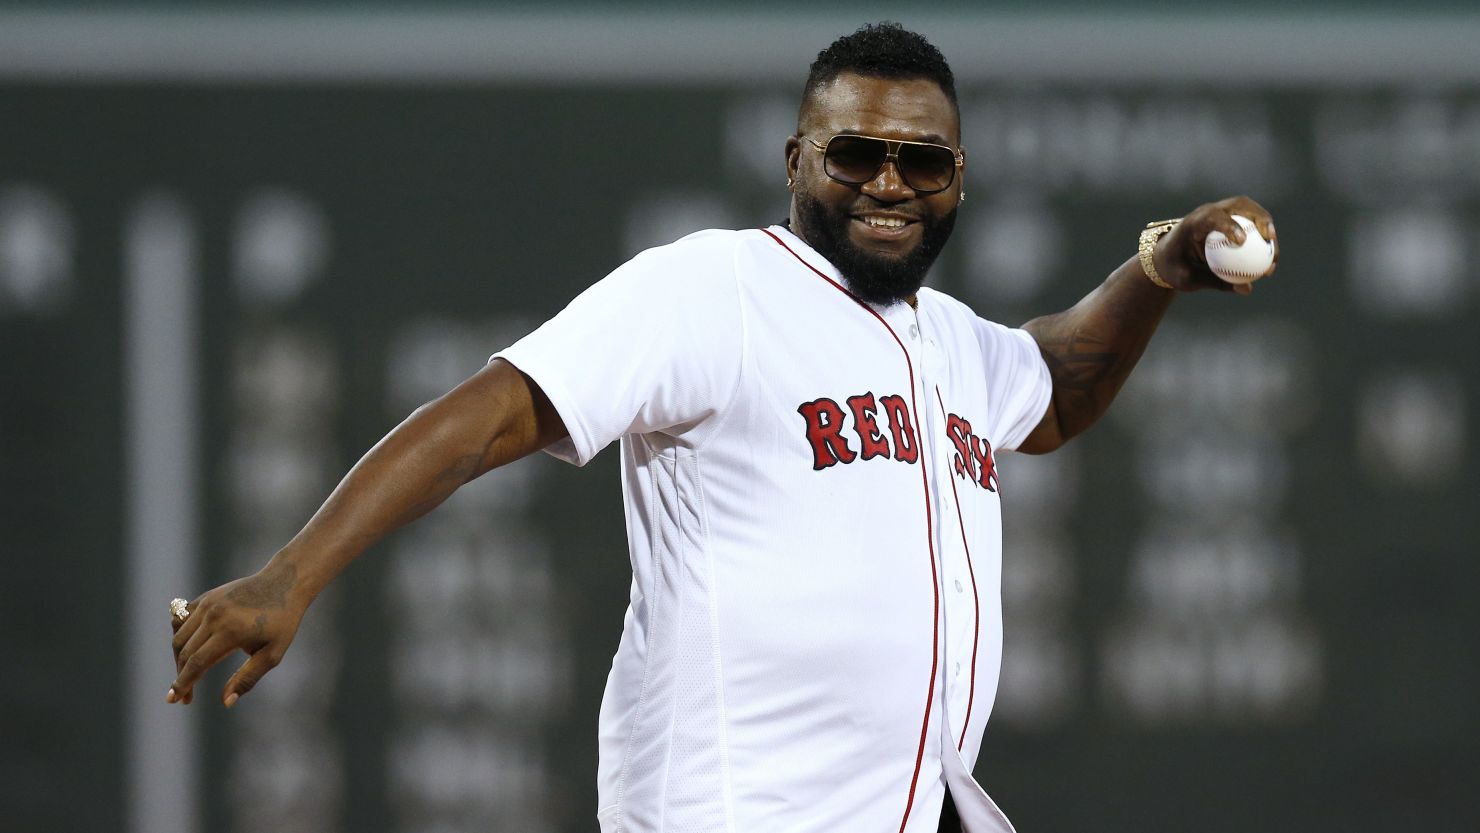 David Ortiz throws out ceremonial first pitch at Fenway Park in his first  public appearance since being shot | CNN